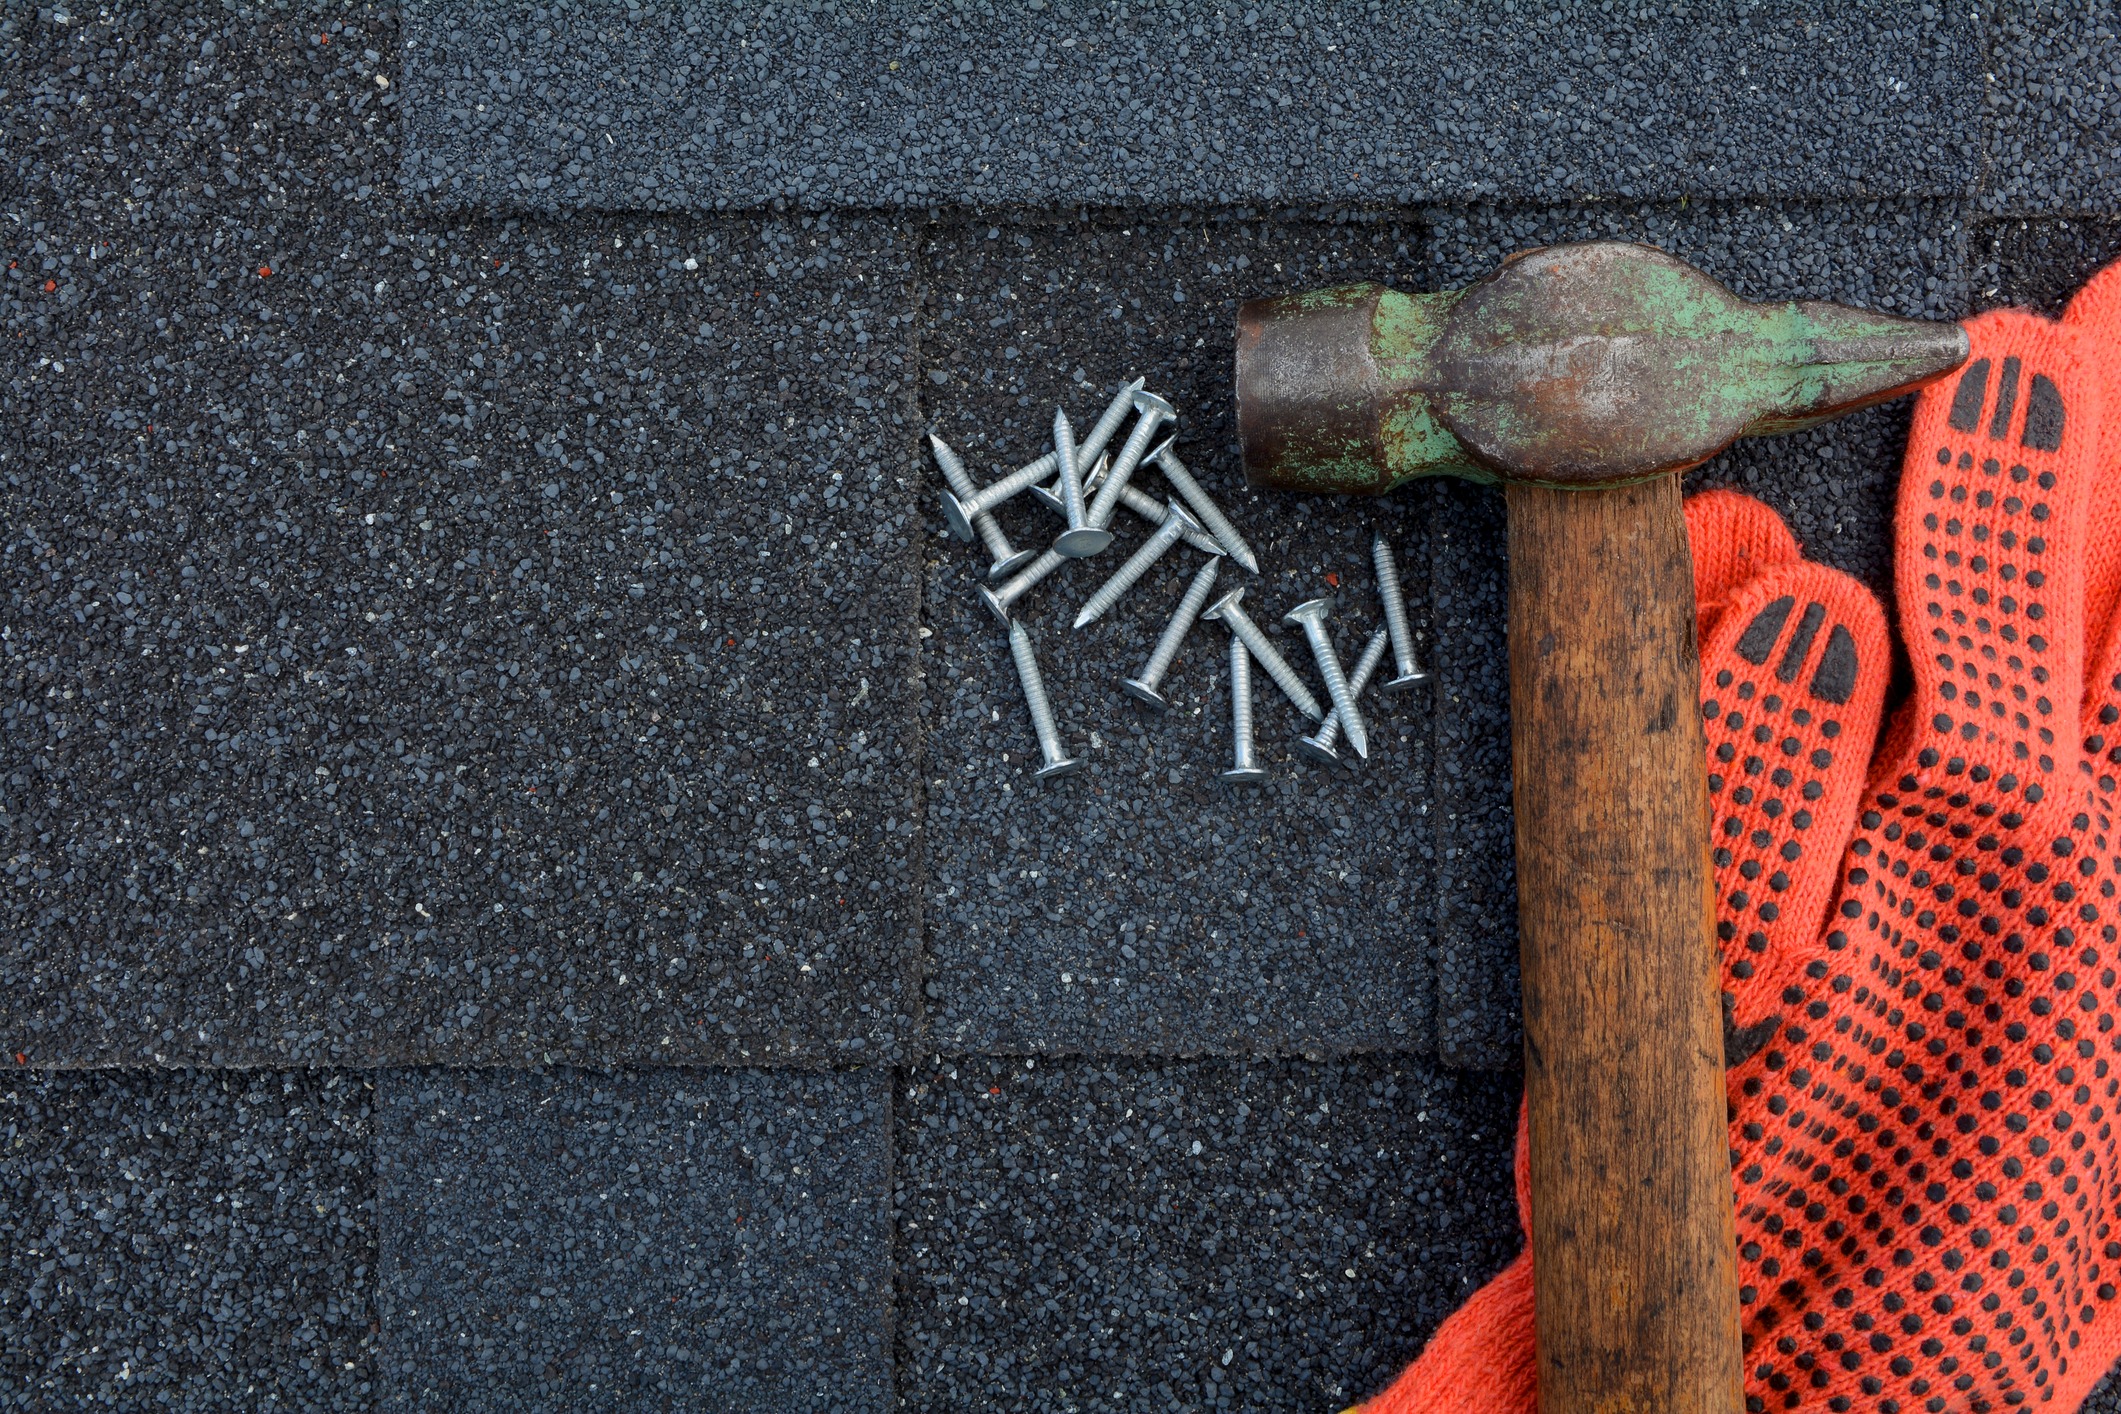 Hammer and nails on new roof tiling